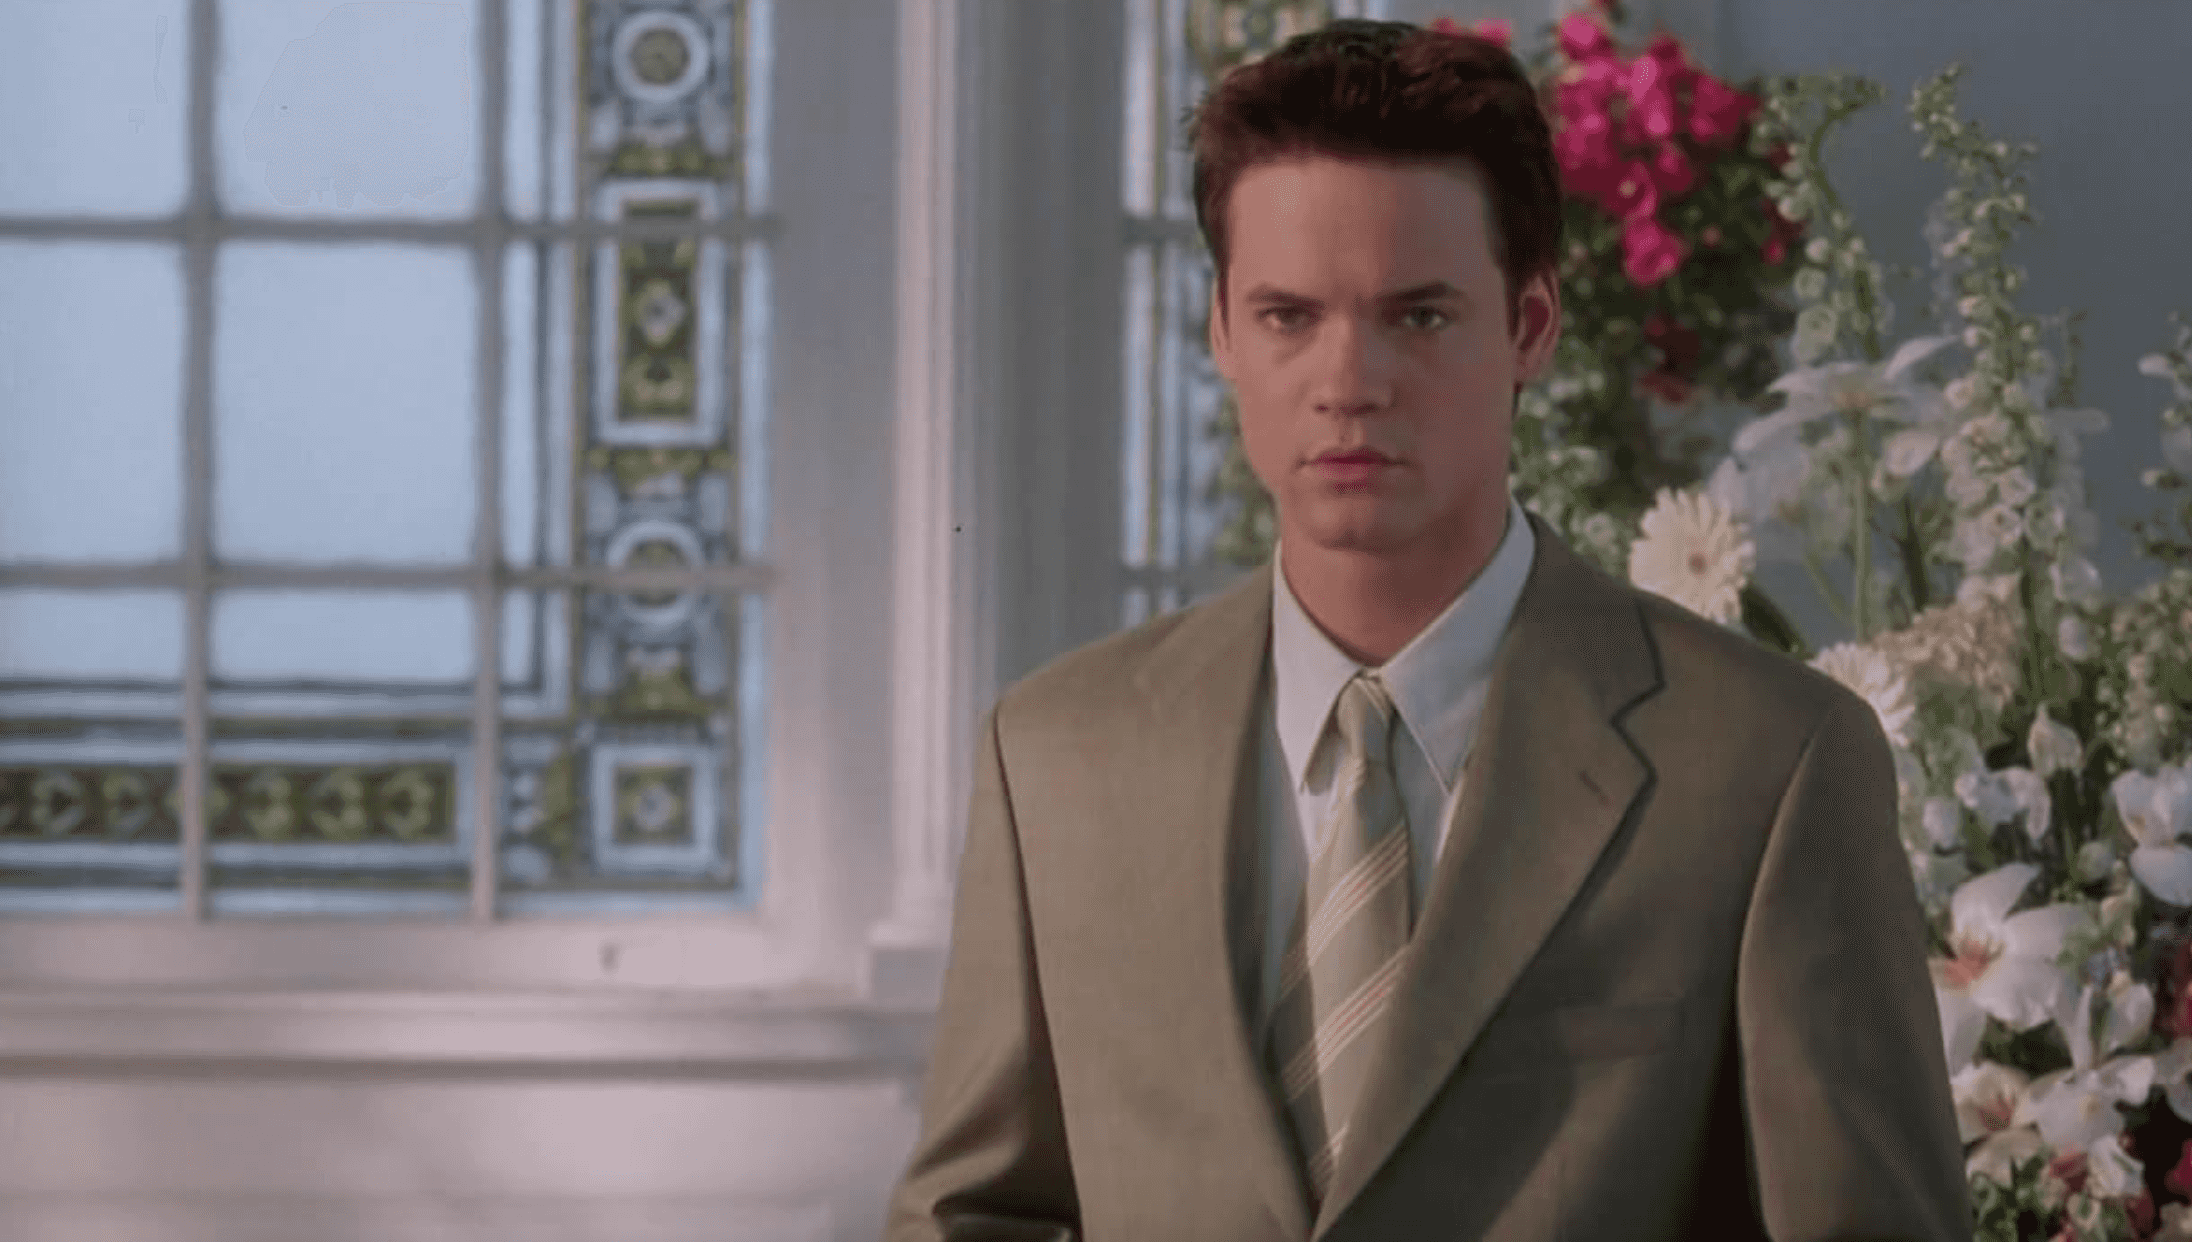 Shane West as Landon, who fell in love with Jamie despite unfavorable odds